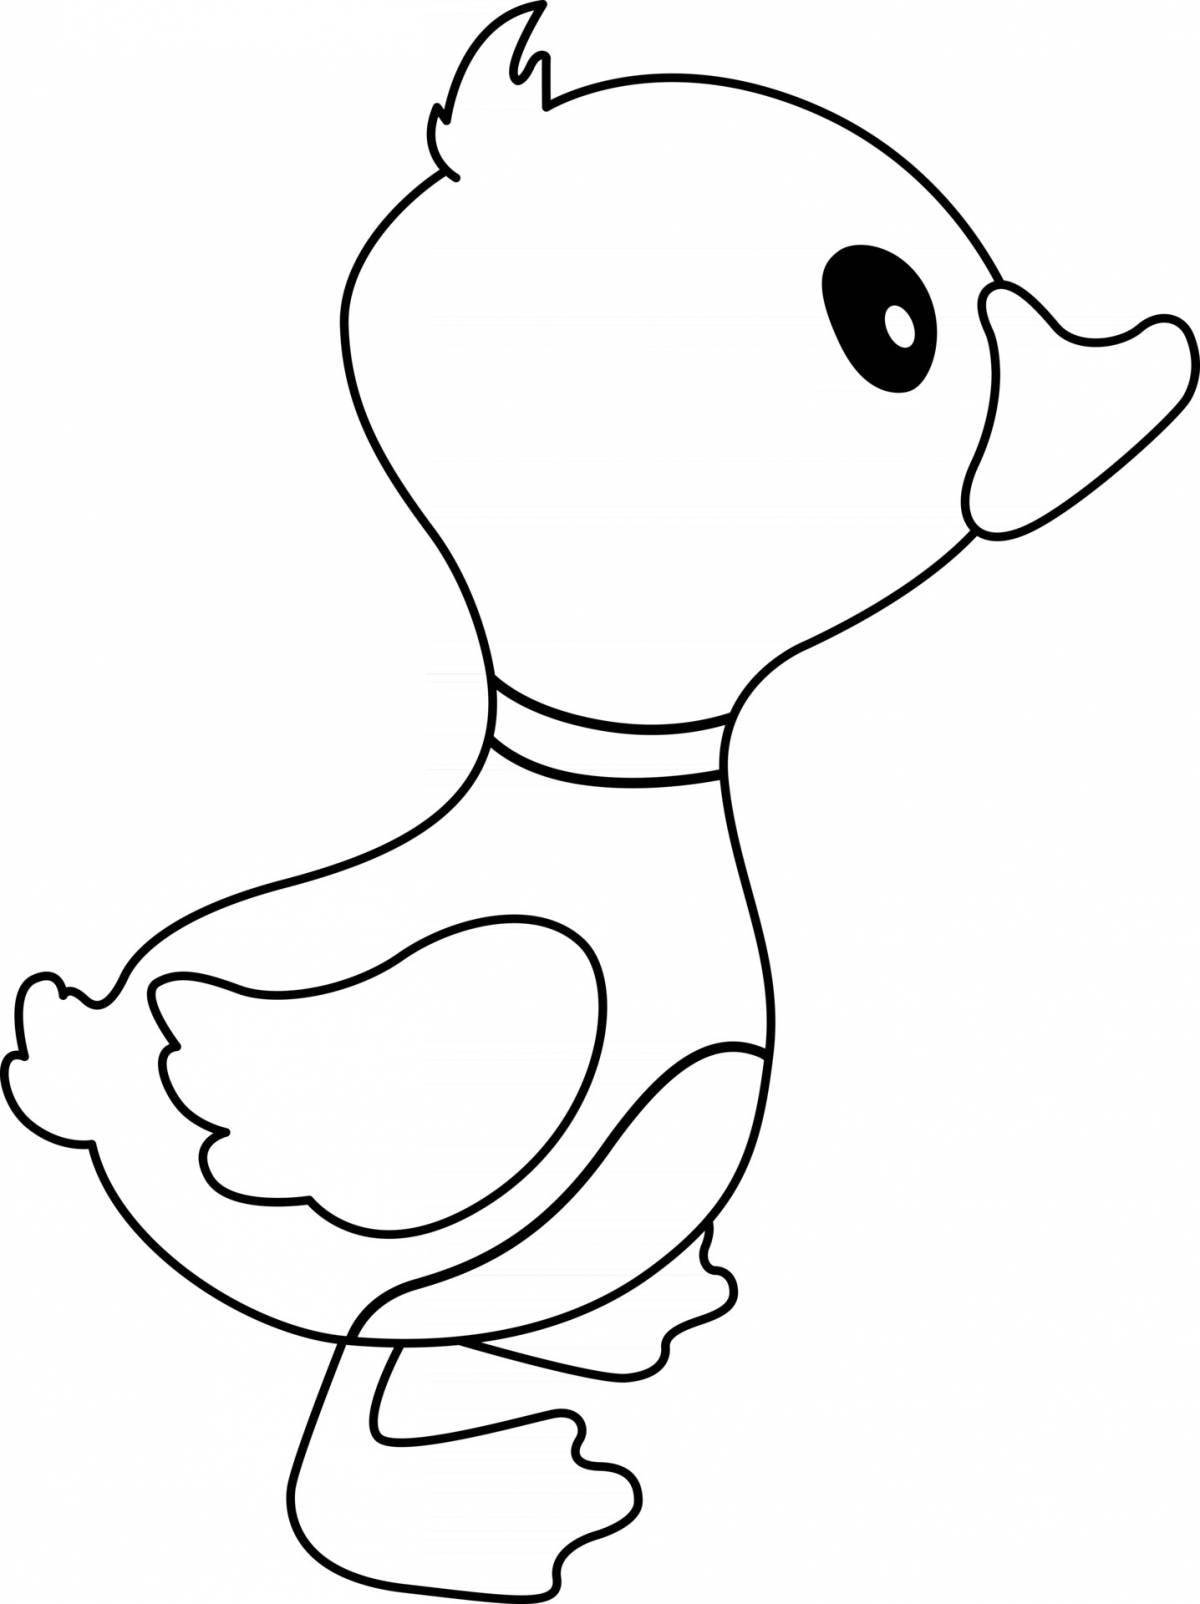 Fun coloring duck for children 3-4 years old